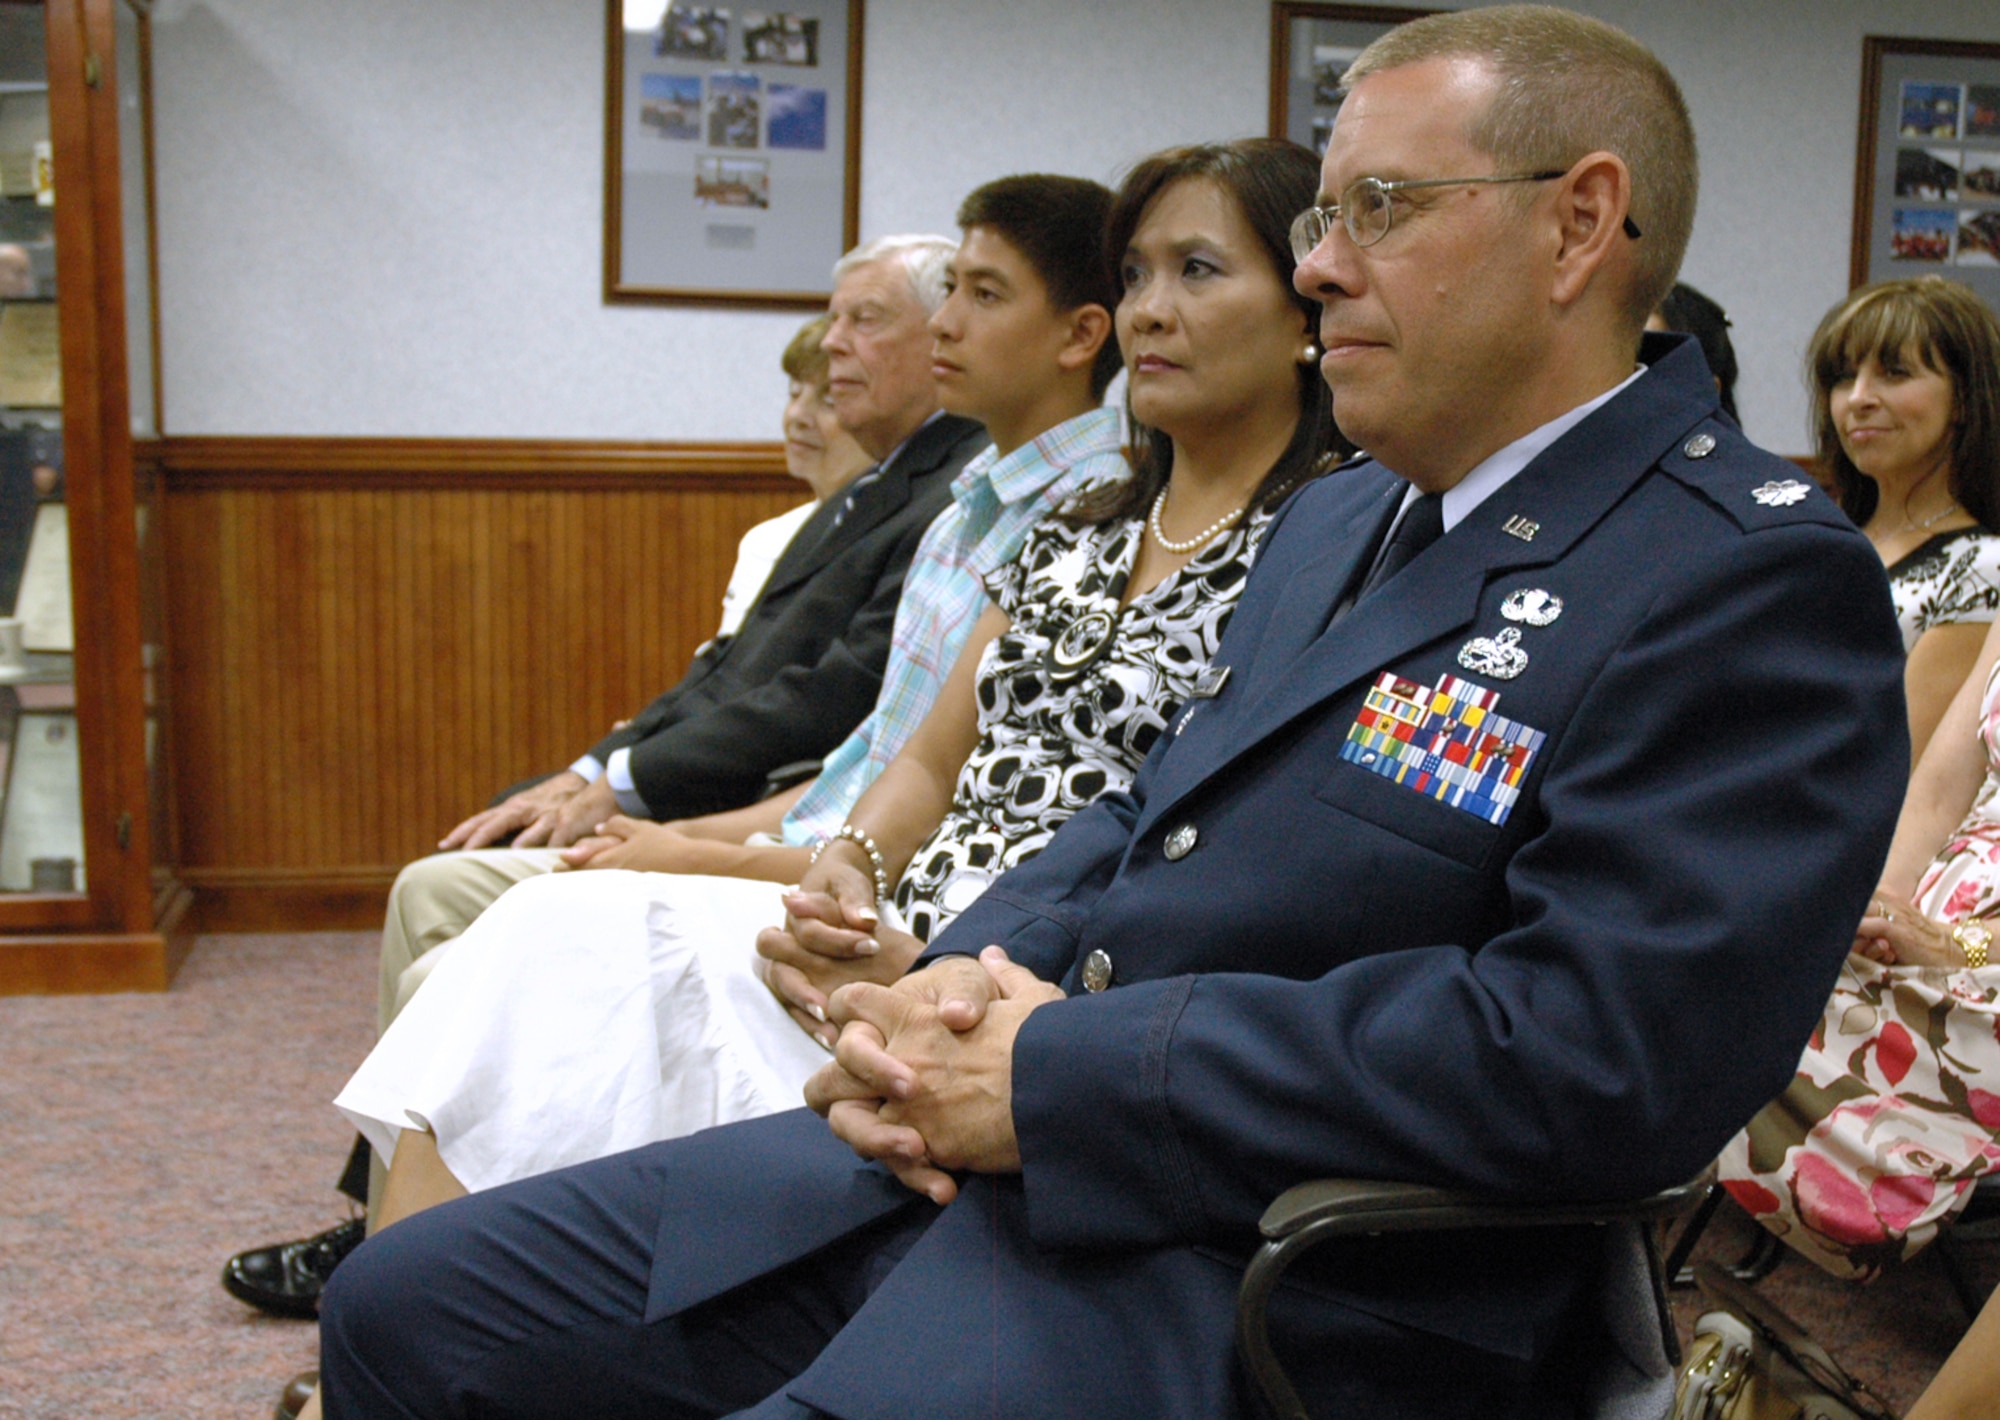 EGLIN AIR FORCE BASE, Fla. -- Lt. Col. Charles Cunningham, Aircraft Maintenance Advisor, HQ Iraqi Air Force, sits with family before being presented with the Bronze Star Medal for meritorious achievements made during his recent deployment. (US Air Force photo/ Airman 1st Class Anthony Jennings)